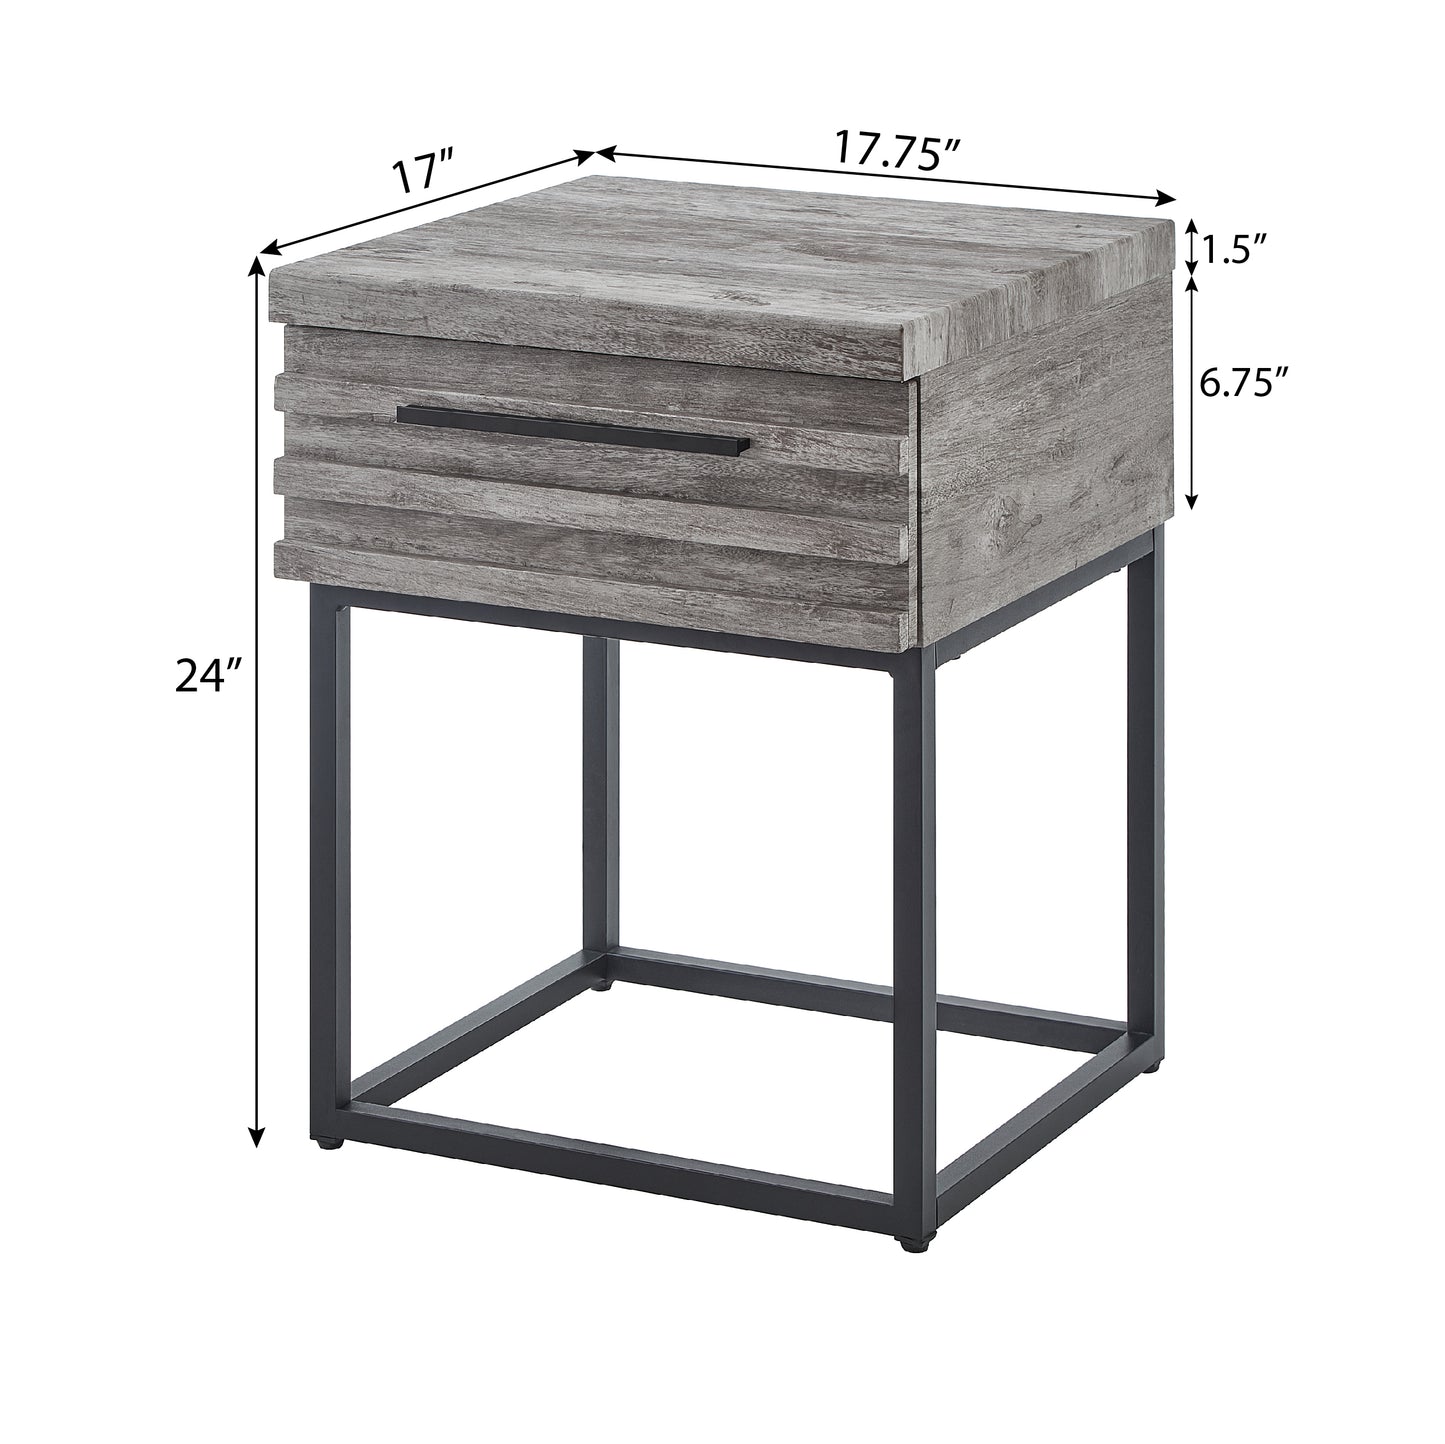 Roundhill Furniture Celestial Contemporary Storage End Table